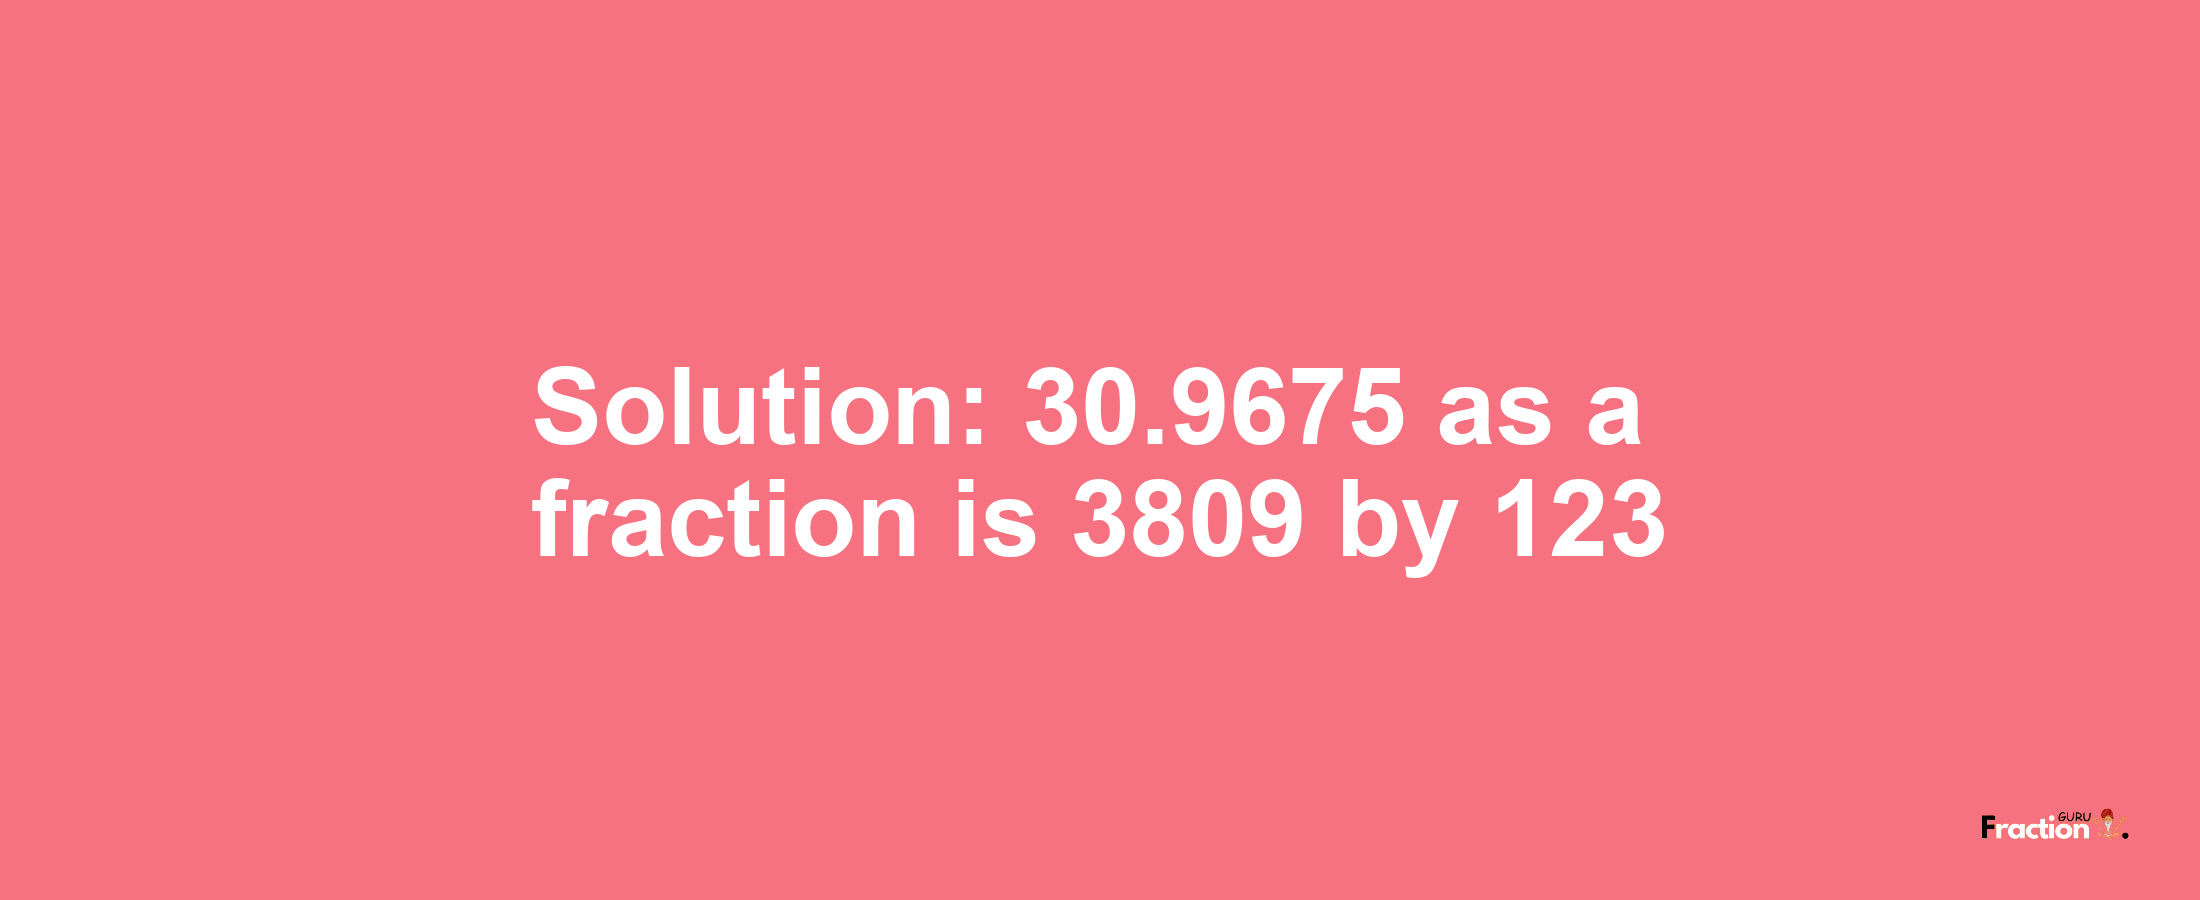 Solution:30.9675 as a fraction is 3809/123